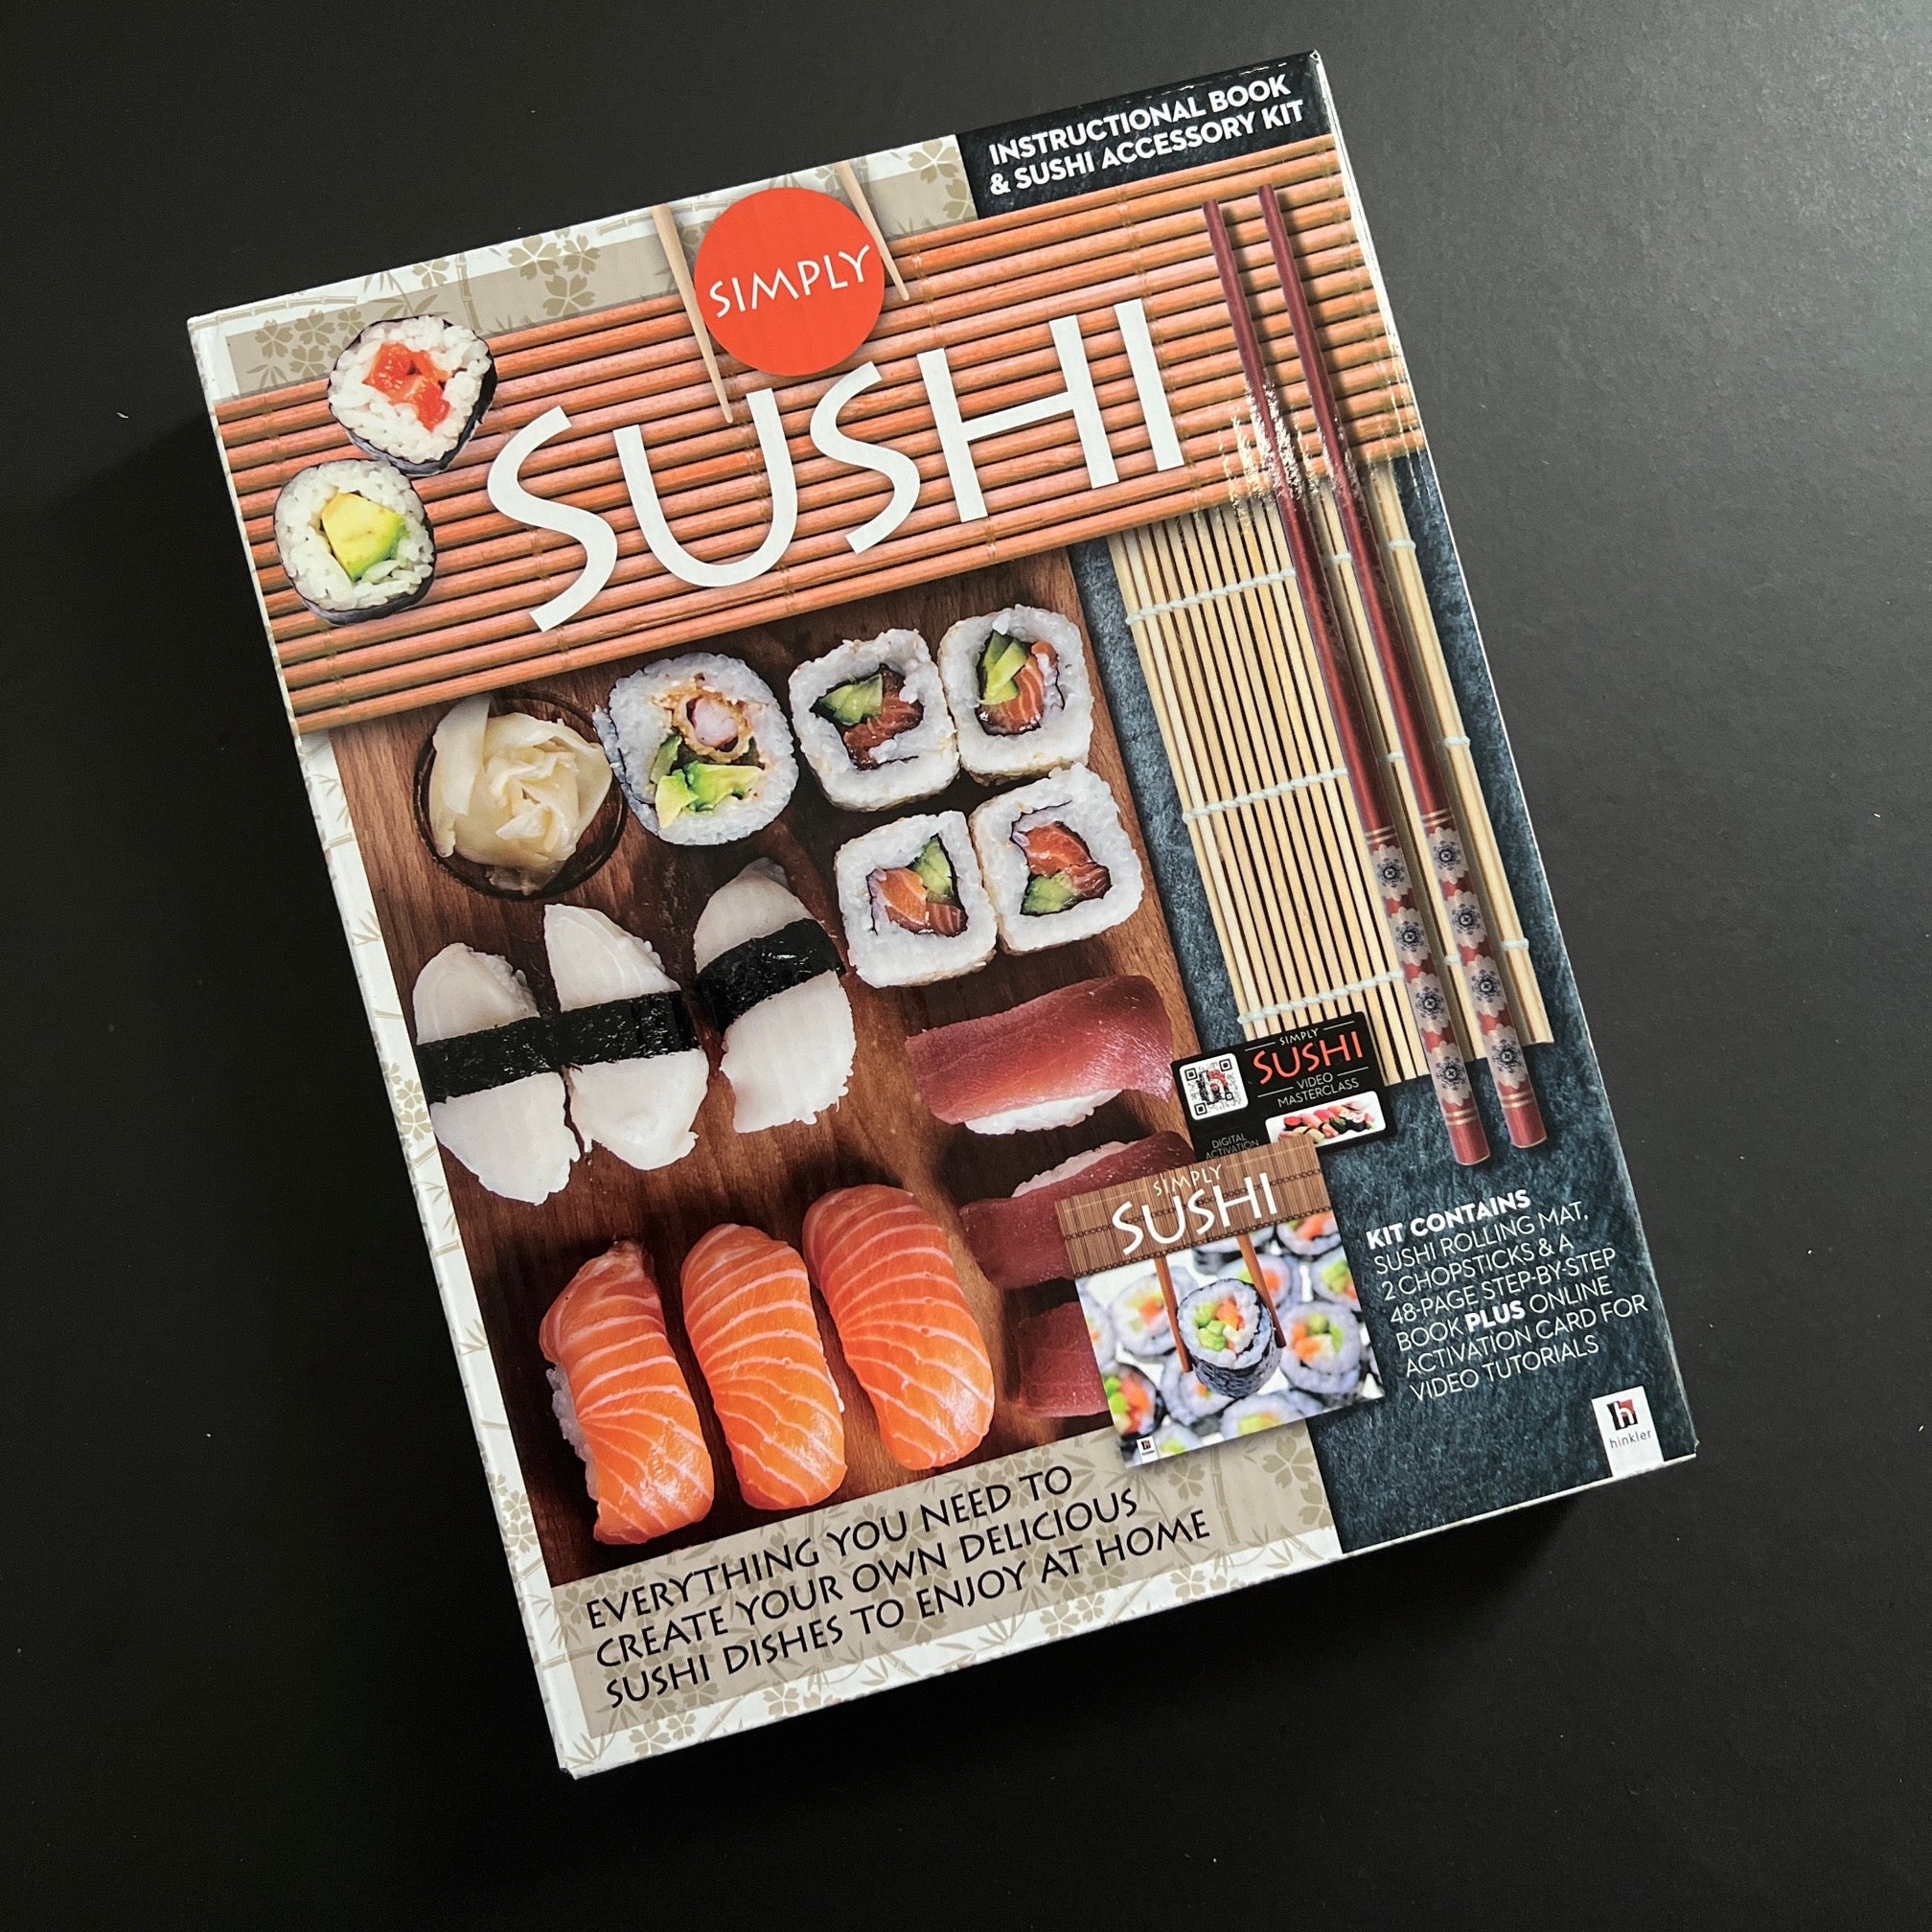 Complete Sushi Kit by Hinkler, Other Format